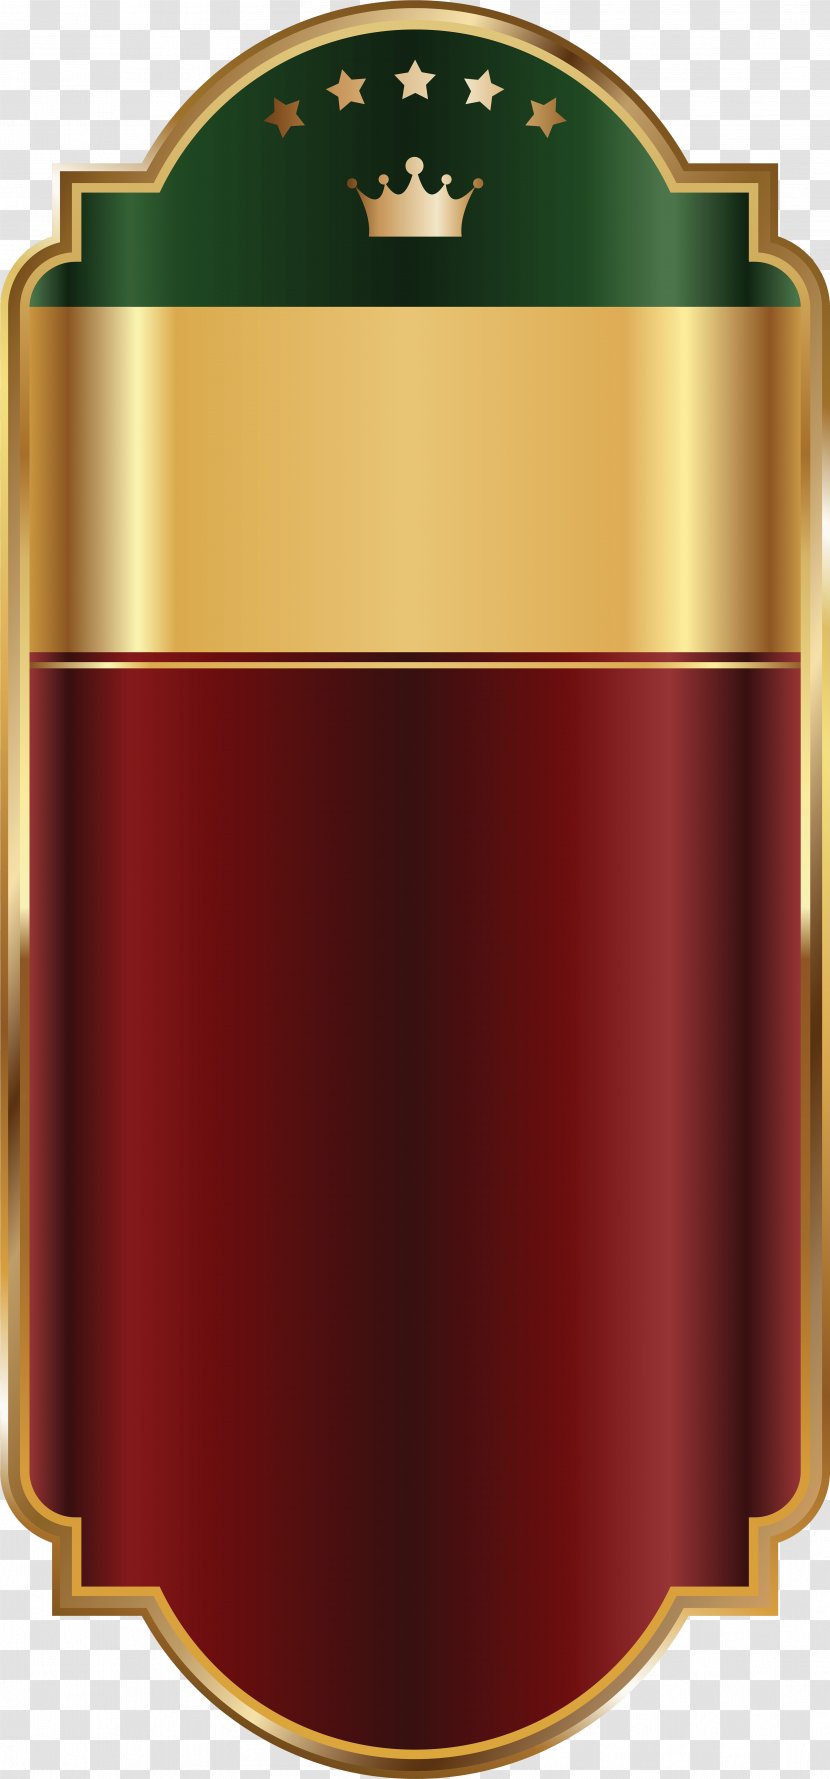 Picture Cartoon - Drinkware - Beverage Can Transparent PNG